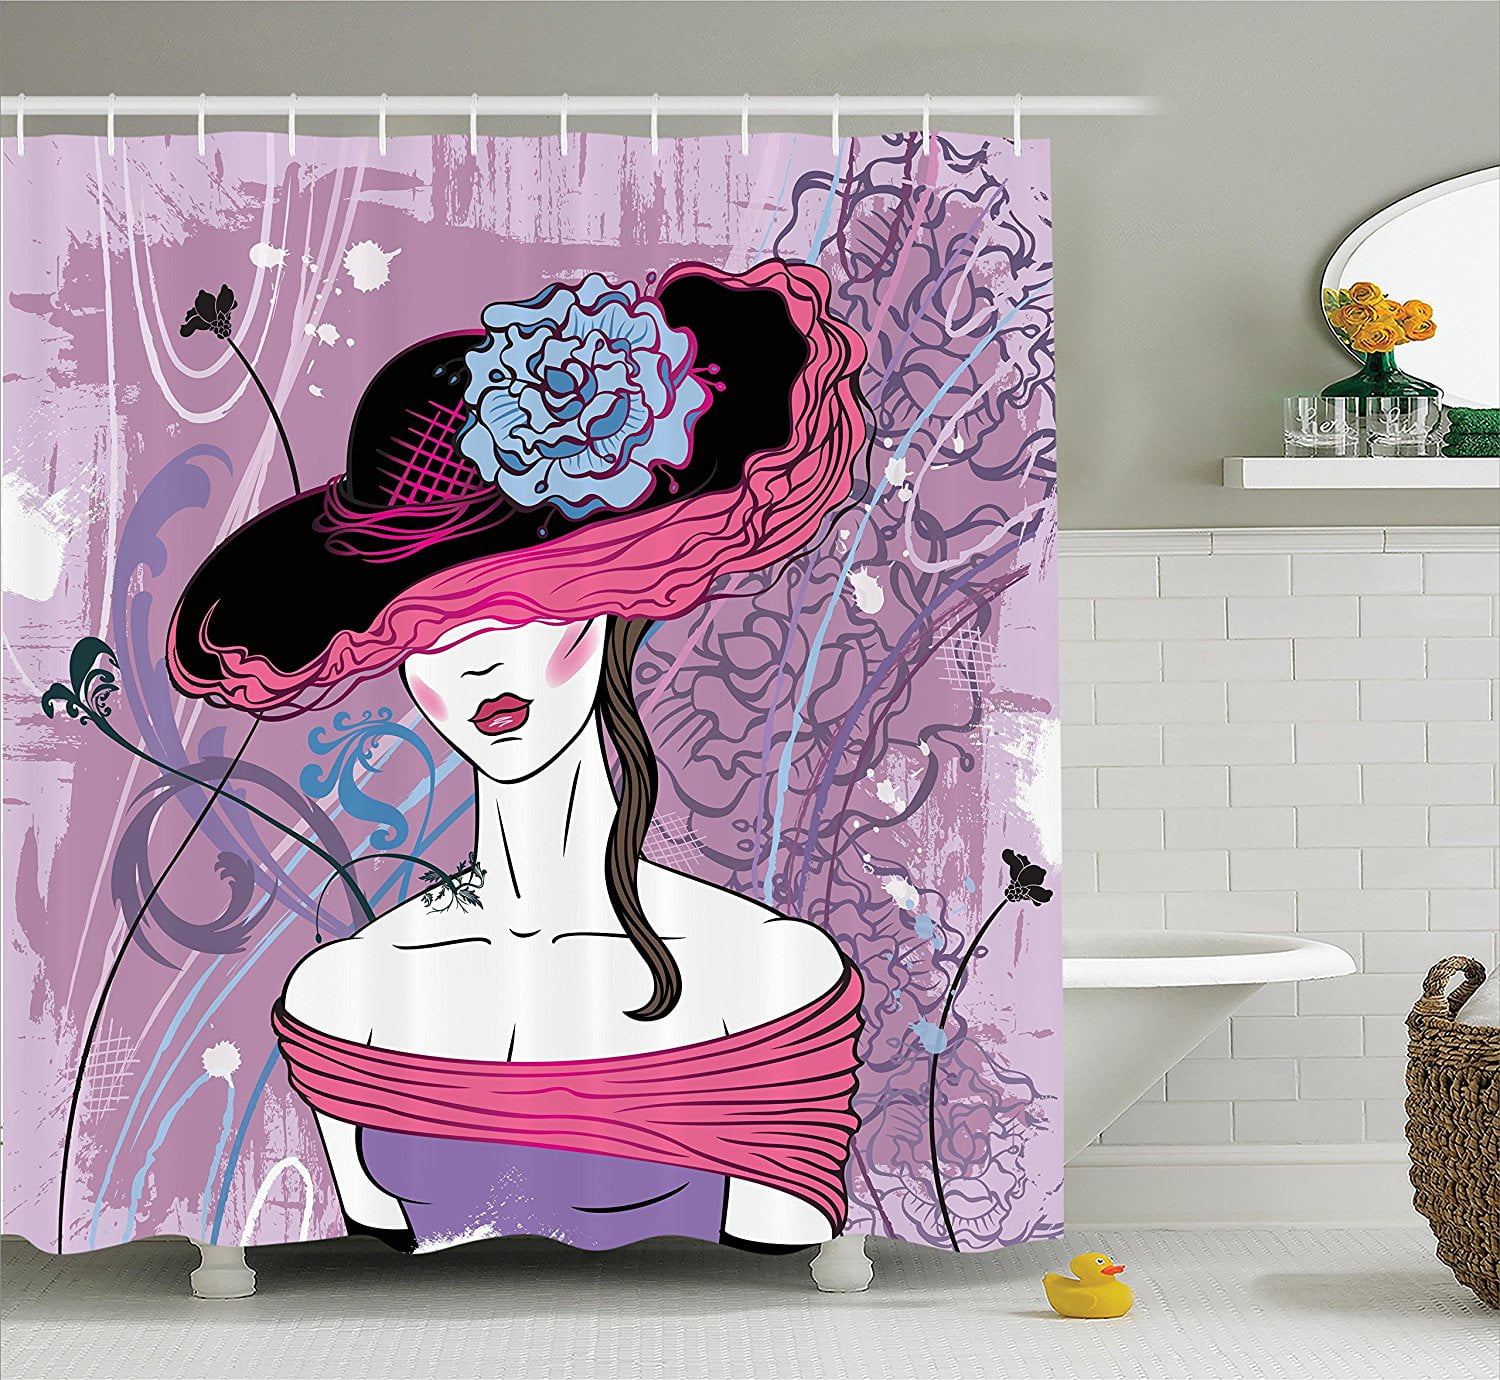 Details about   African Woman Holding An Umbrella Bath Shower Curtain Bathroom Accessories 71'' 